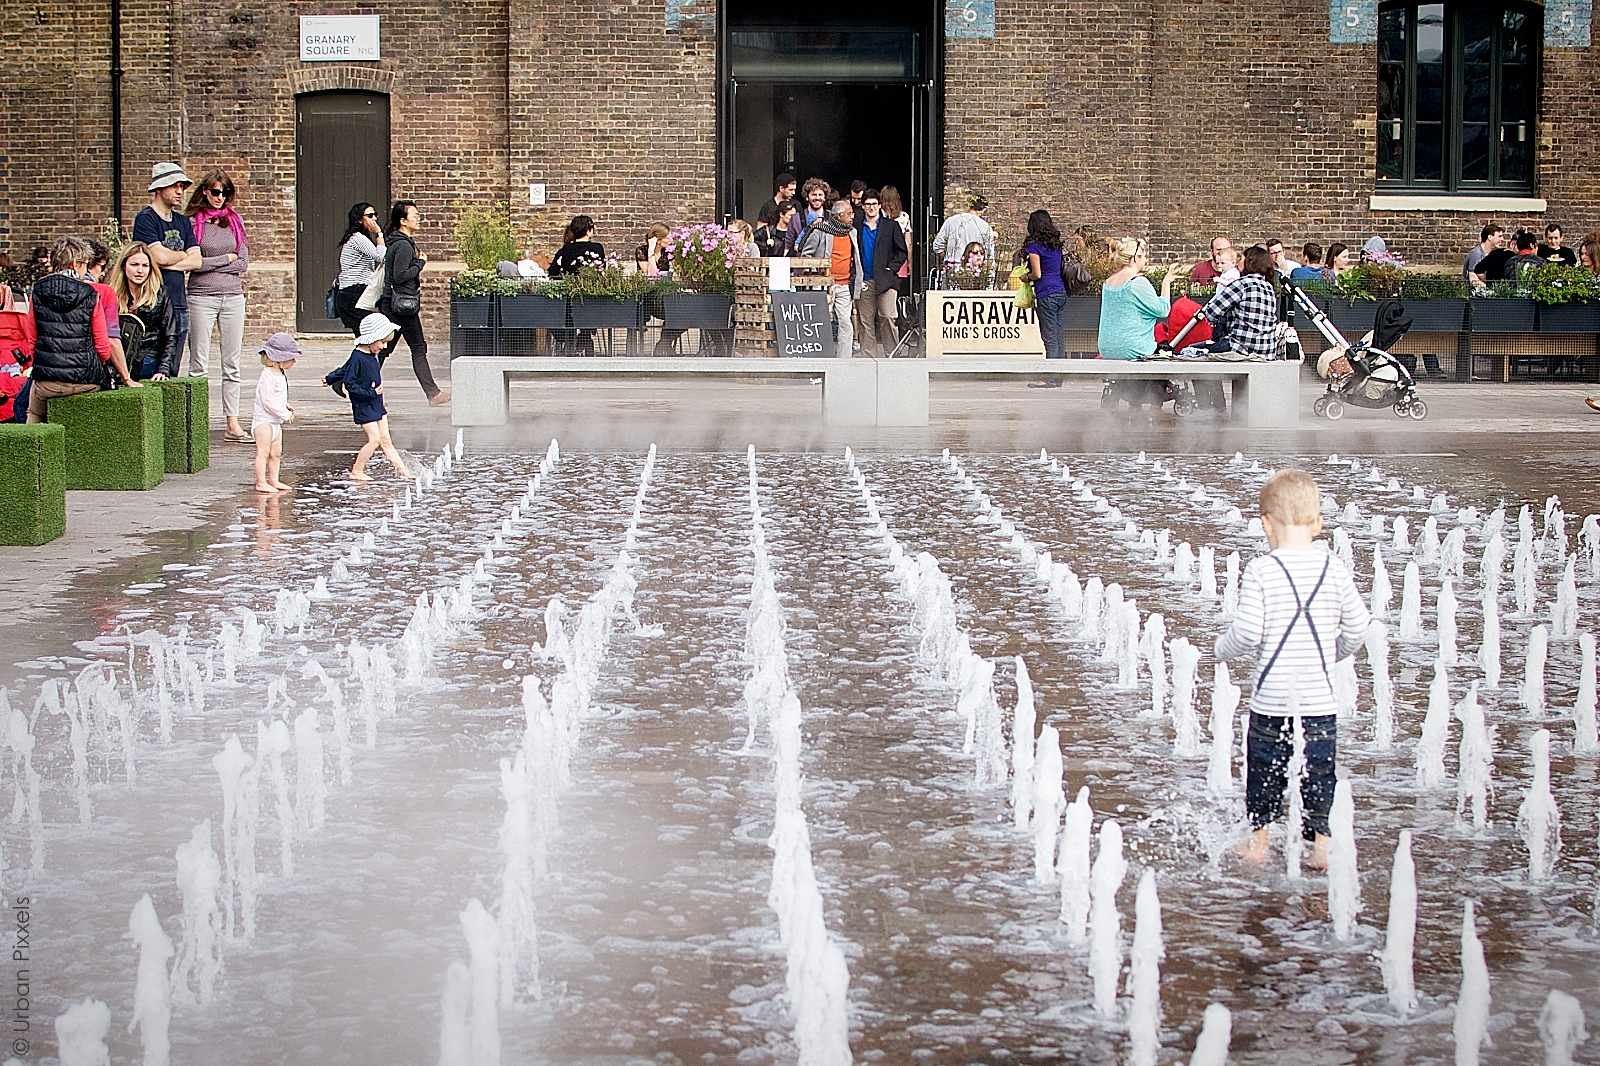 Fountain at Granary Square and Caravan King's Cross